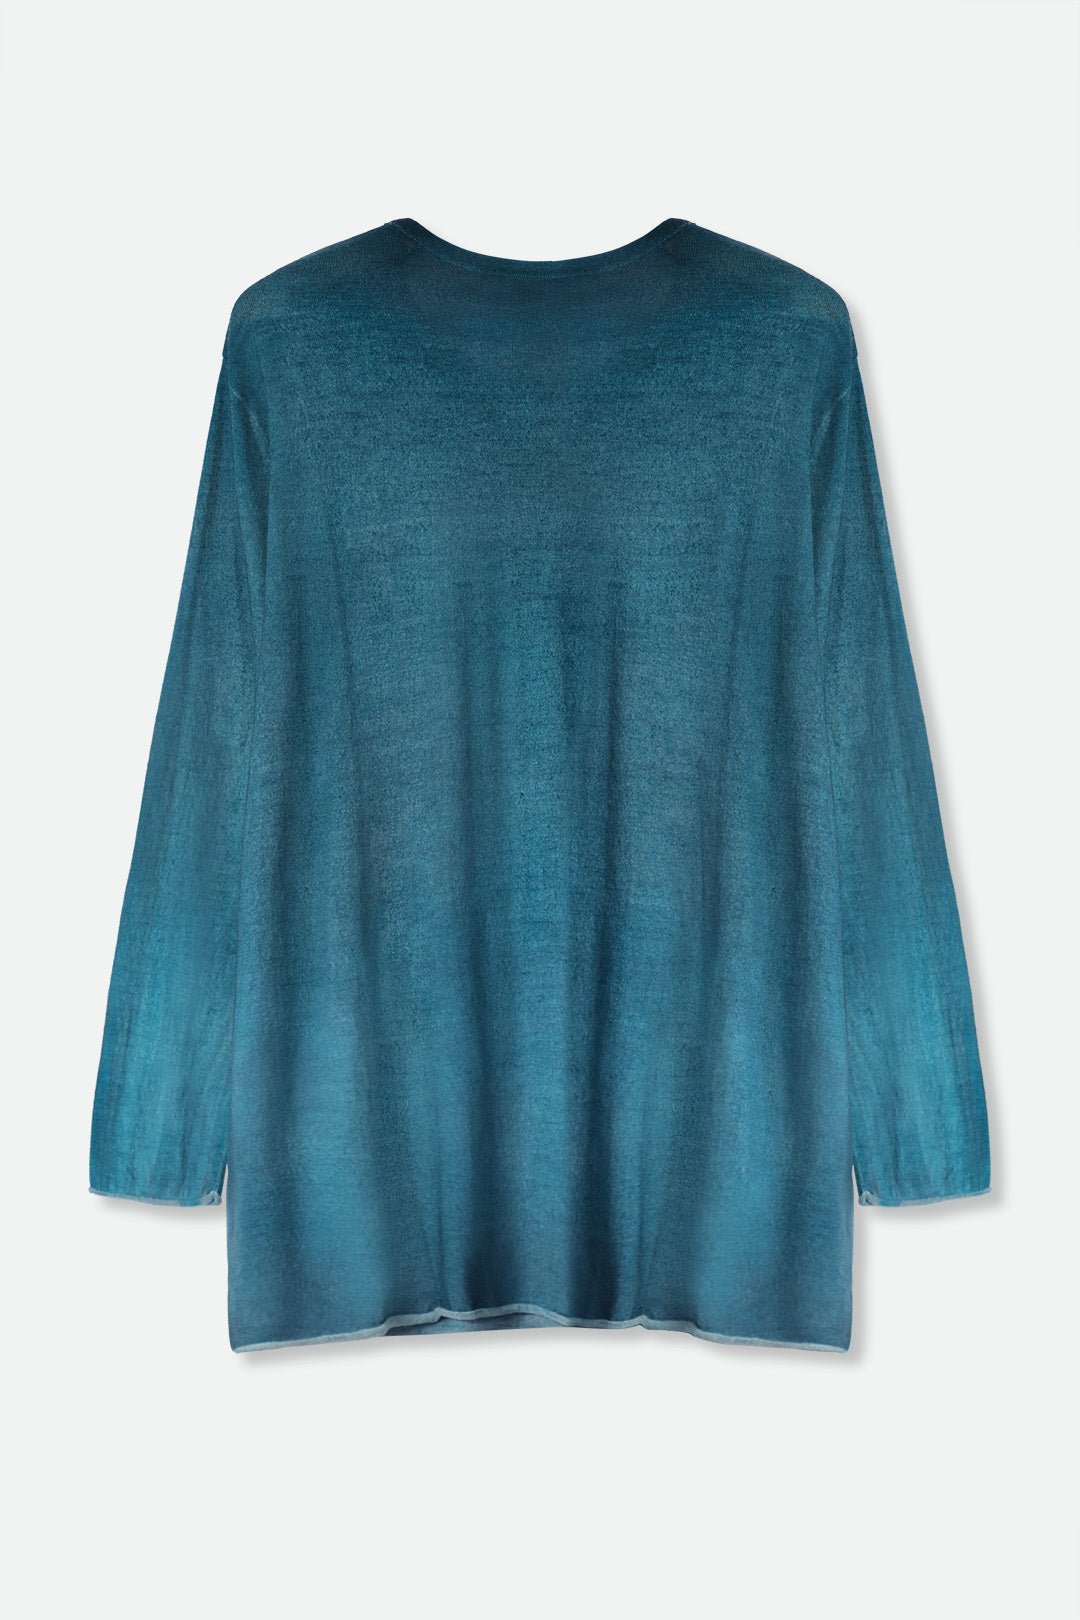 MARIANA IN HAND-DYED LIGHTWEIGHT CASHMERE DEEP BLUE TEAL - Jarbo